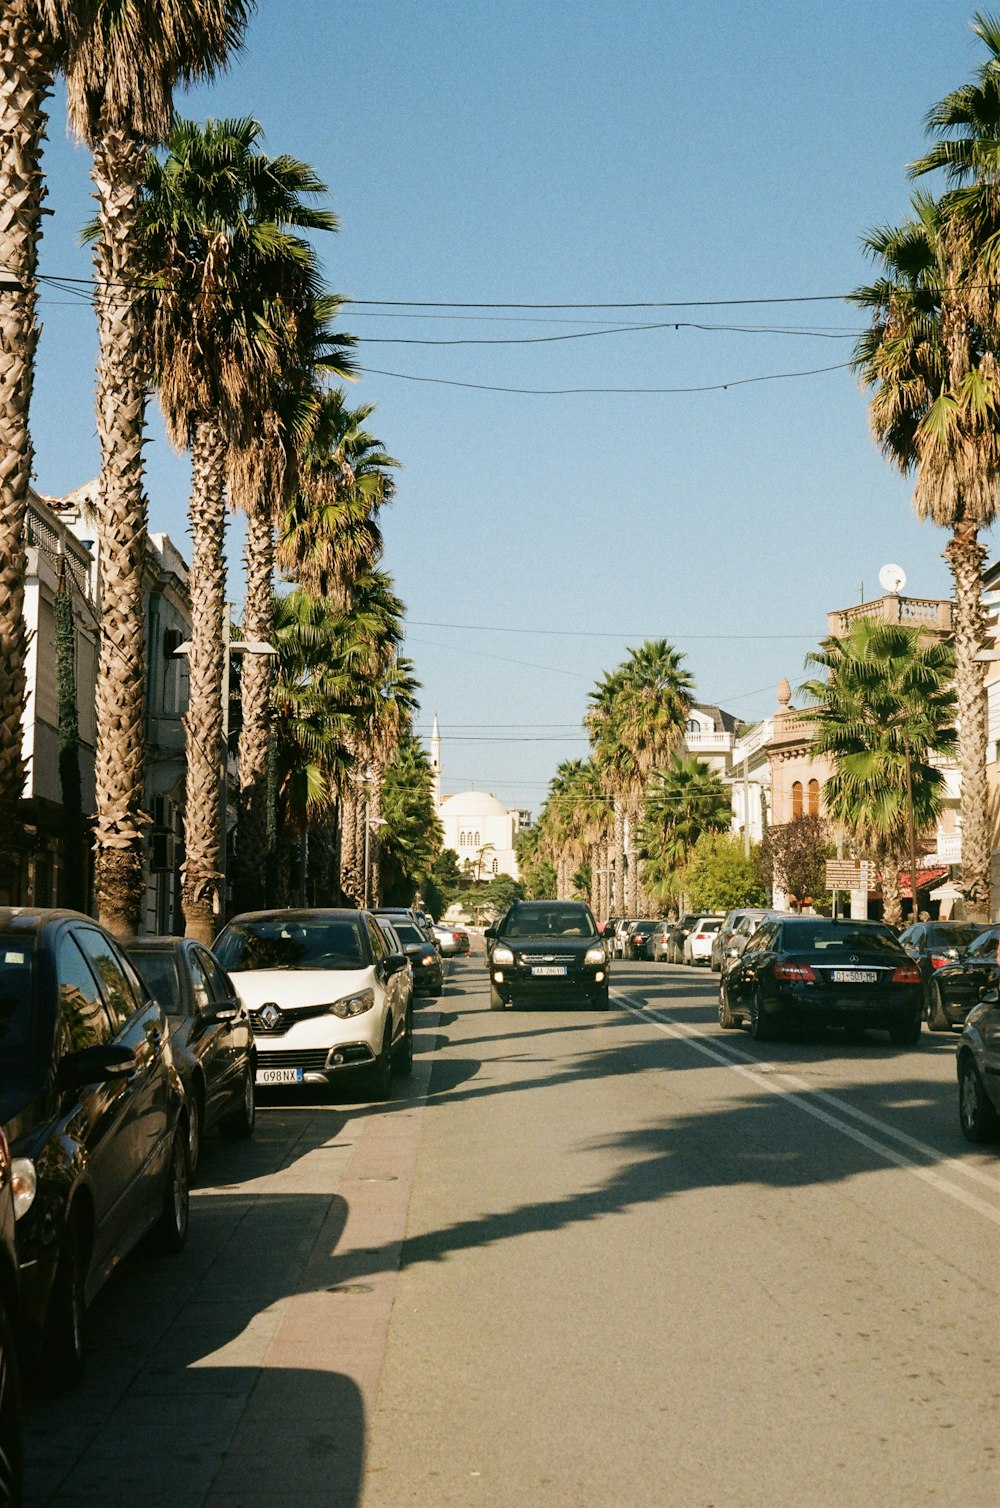 a street lined with palm trees and parked cars